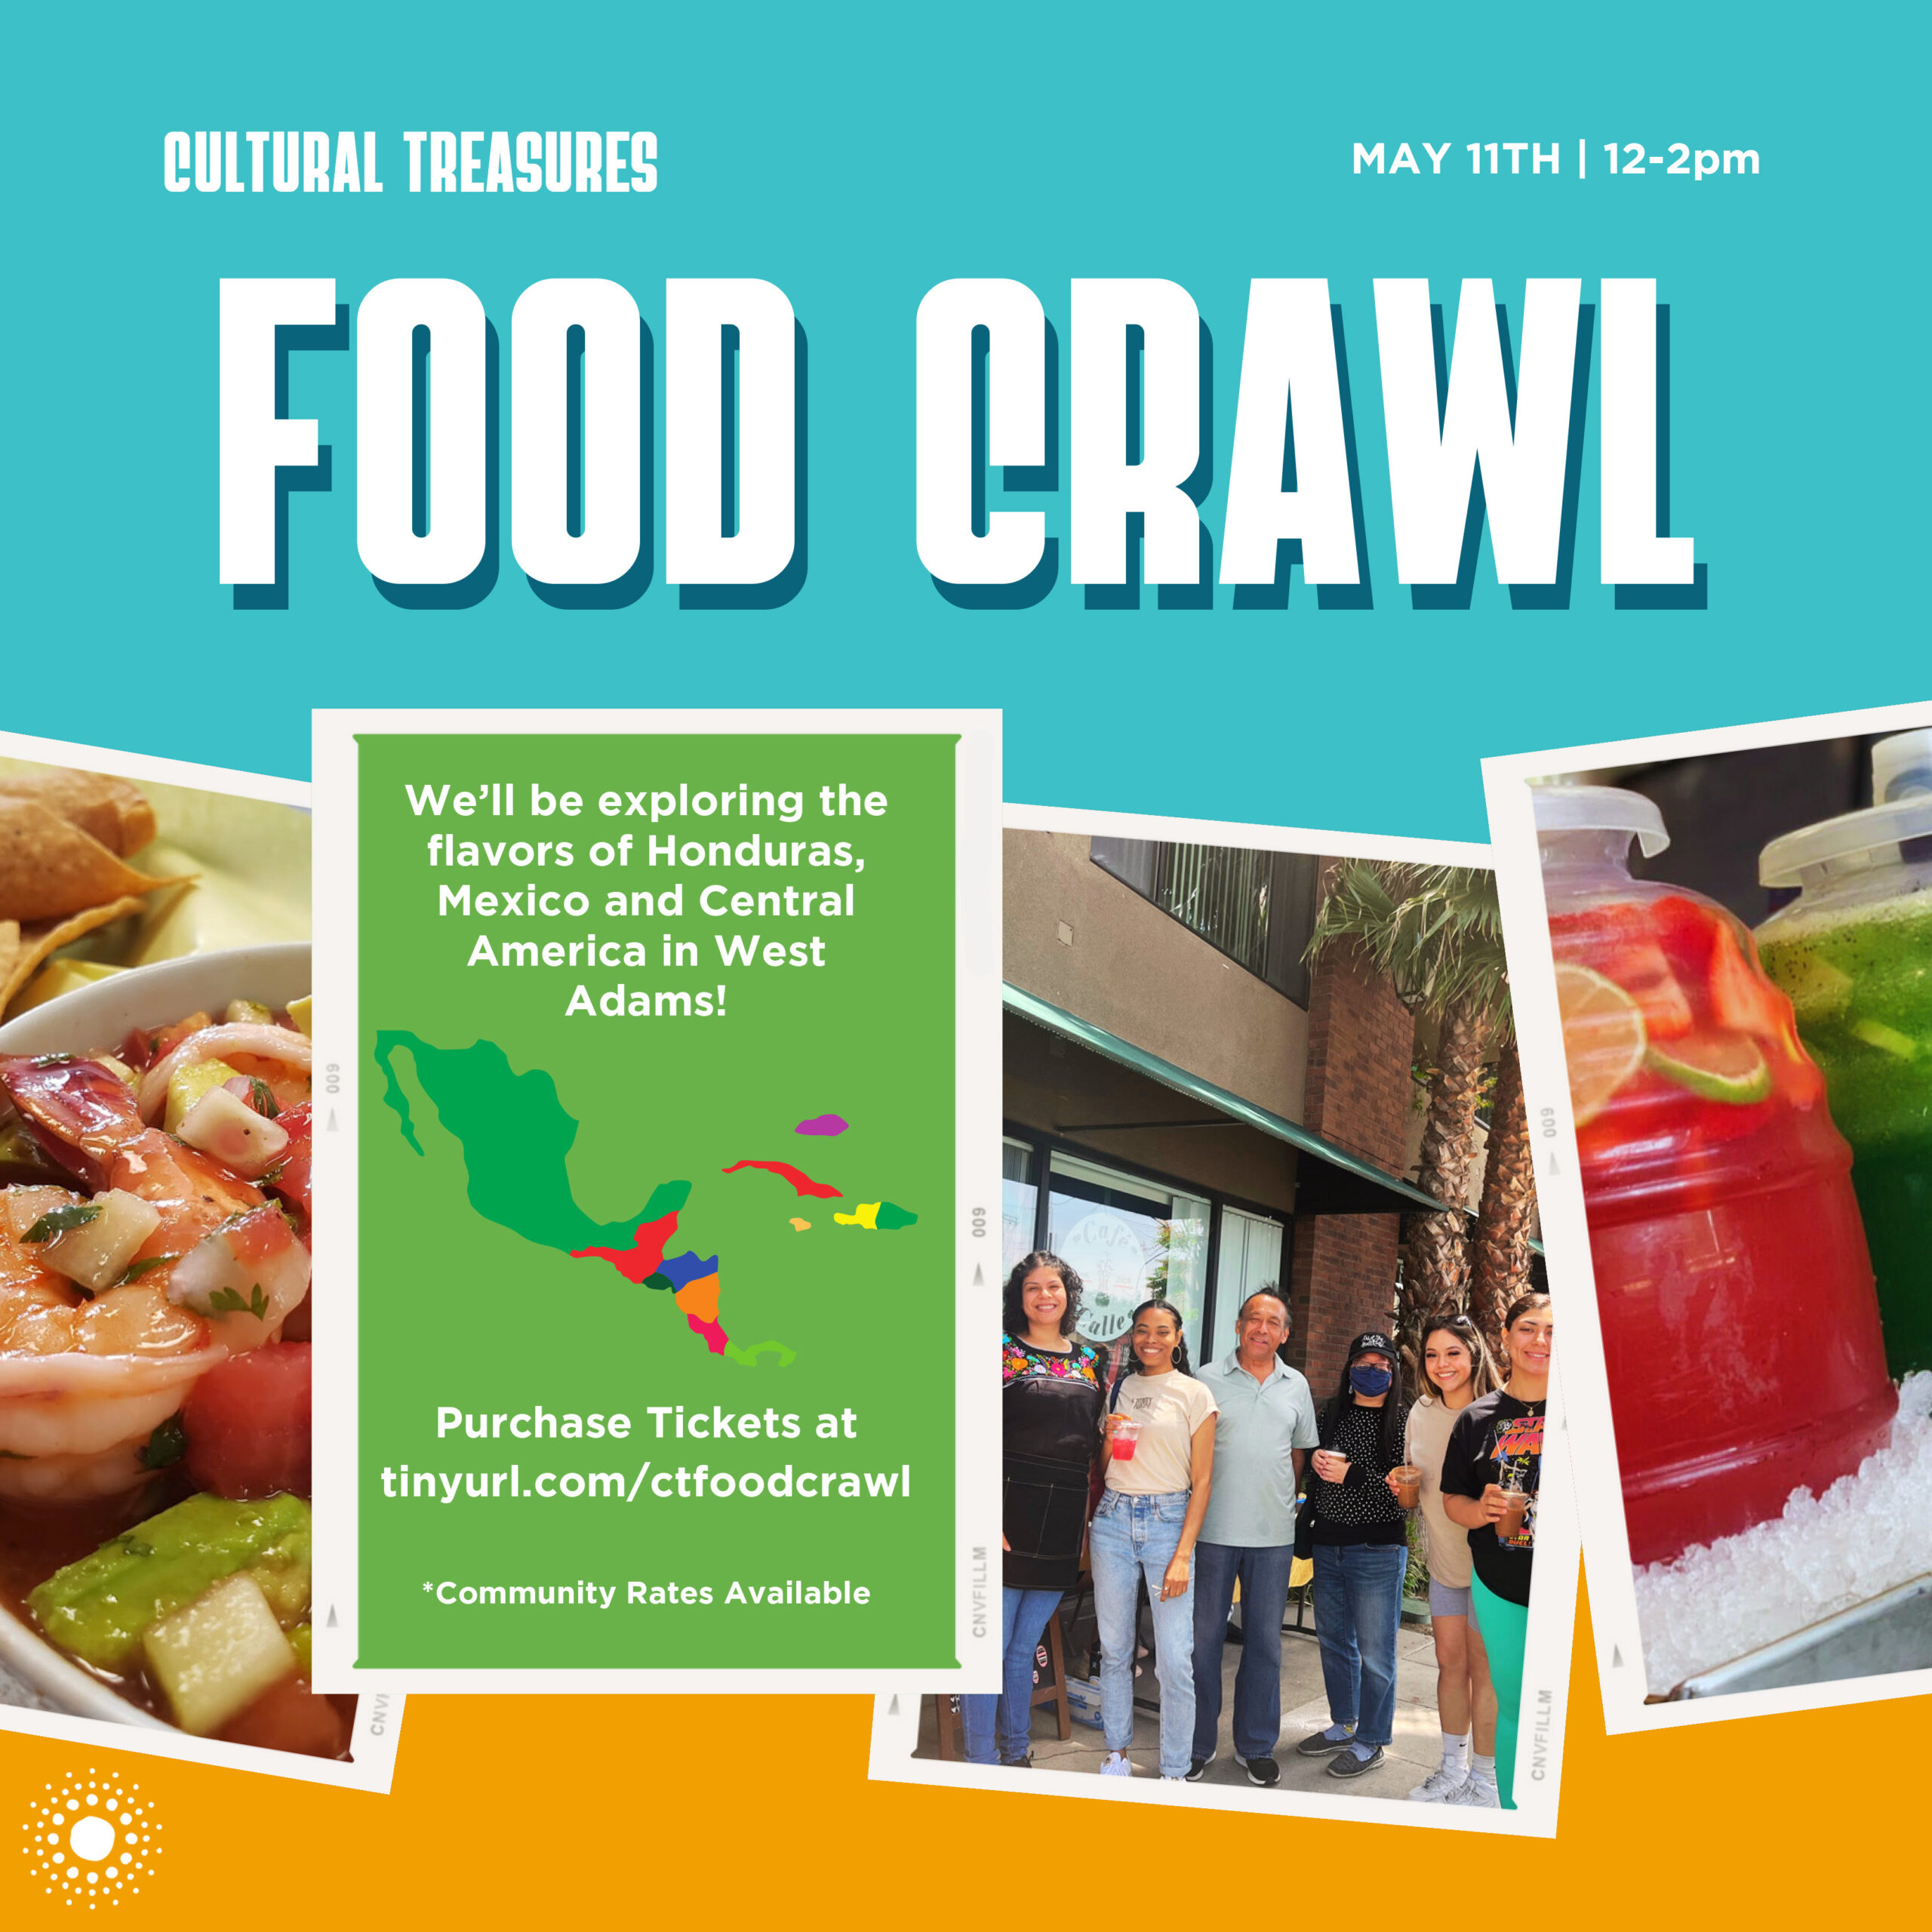 The image is a graphical user interface promoting a food crawl event called "Cultural Treasures" happening on May 11th from 12-2pm. The event will explore flavors from Honduras, Mexico, and Central America in West Adams. Tickets can be purchased at tinyurl.com/ctfoodcrawl with community rates available. The tags associated with this image include text, fast food, food, food group, and vegetable.